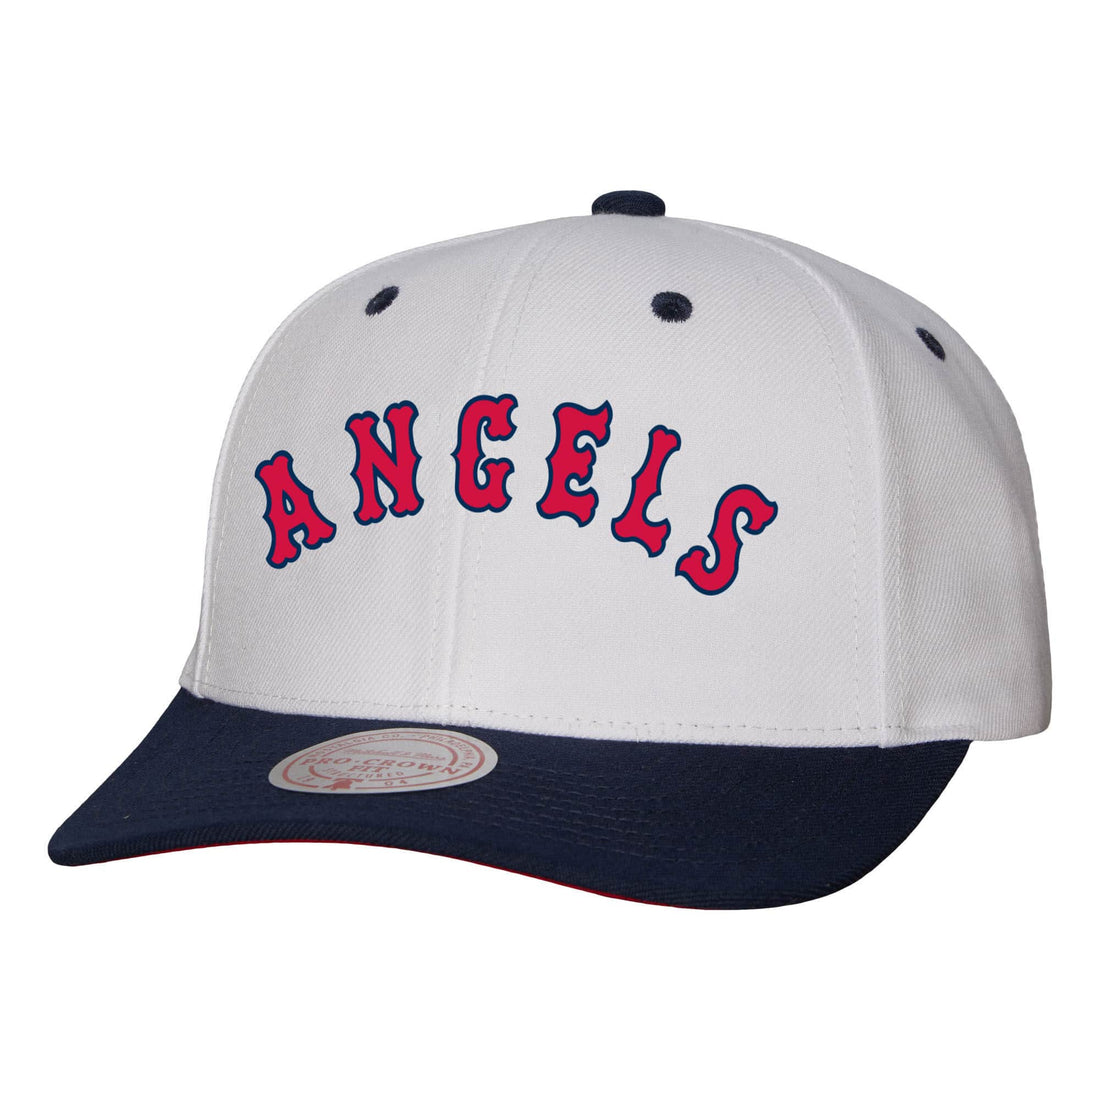 Mitchell and Ness MLB Evergreen Pro Snapback Coop Blue Jays